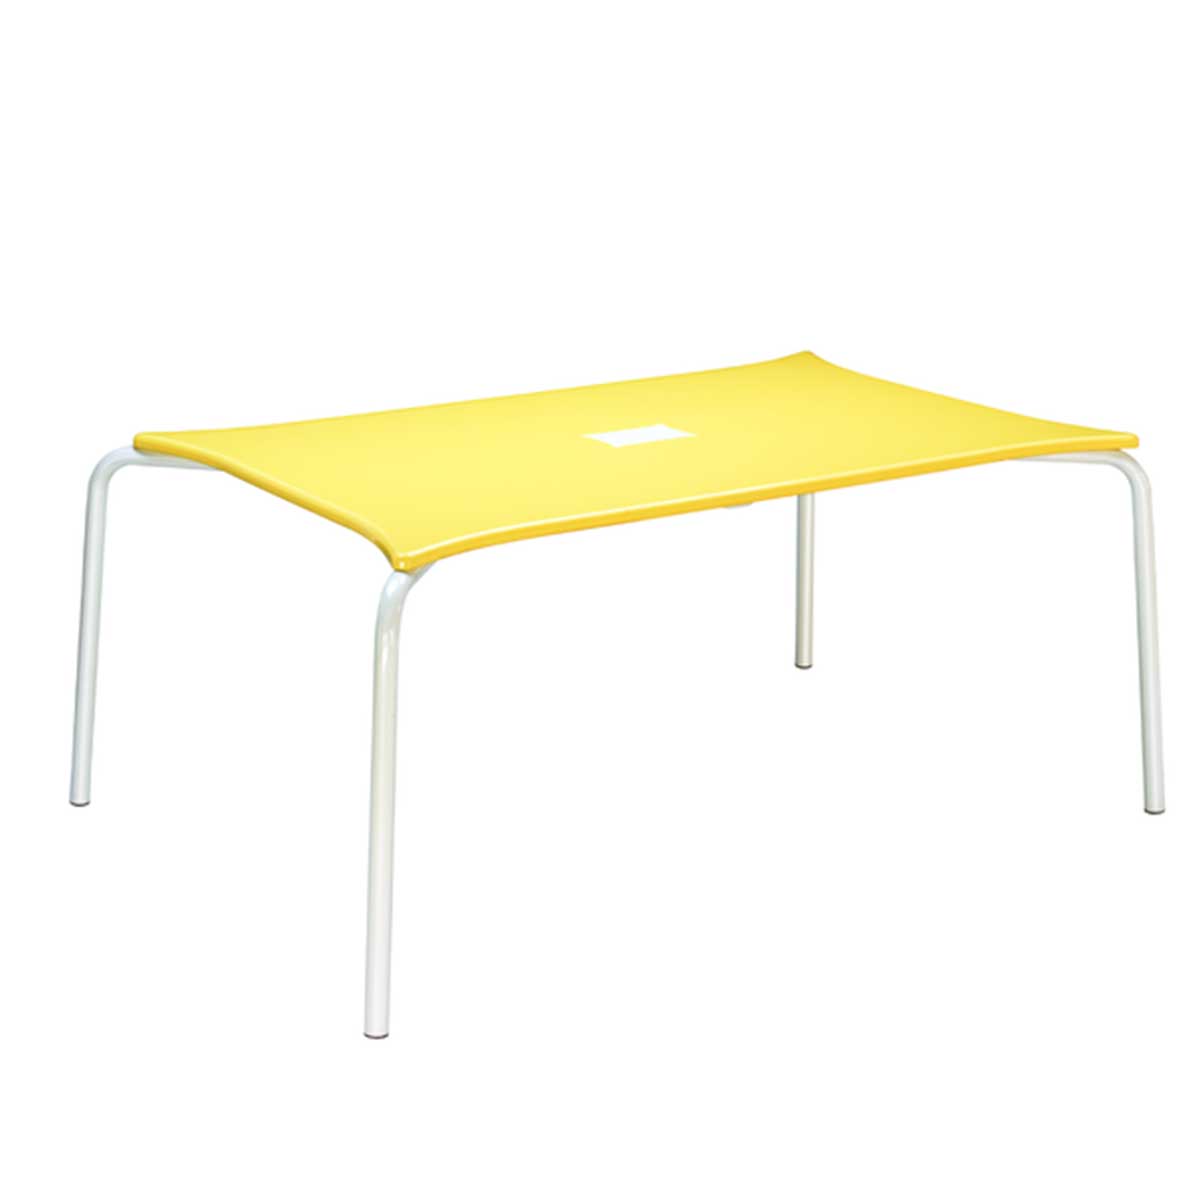 Cafeteria Table Manufacturers, Suppliers in Pitampura